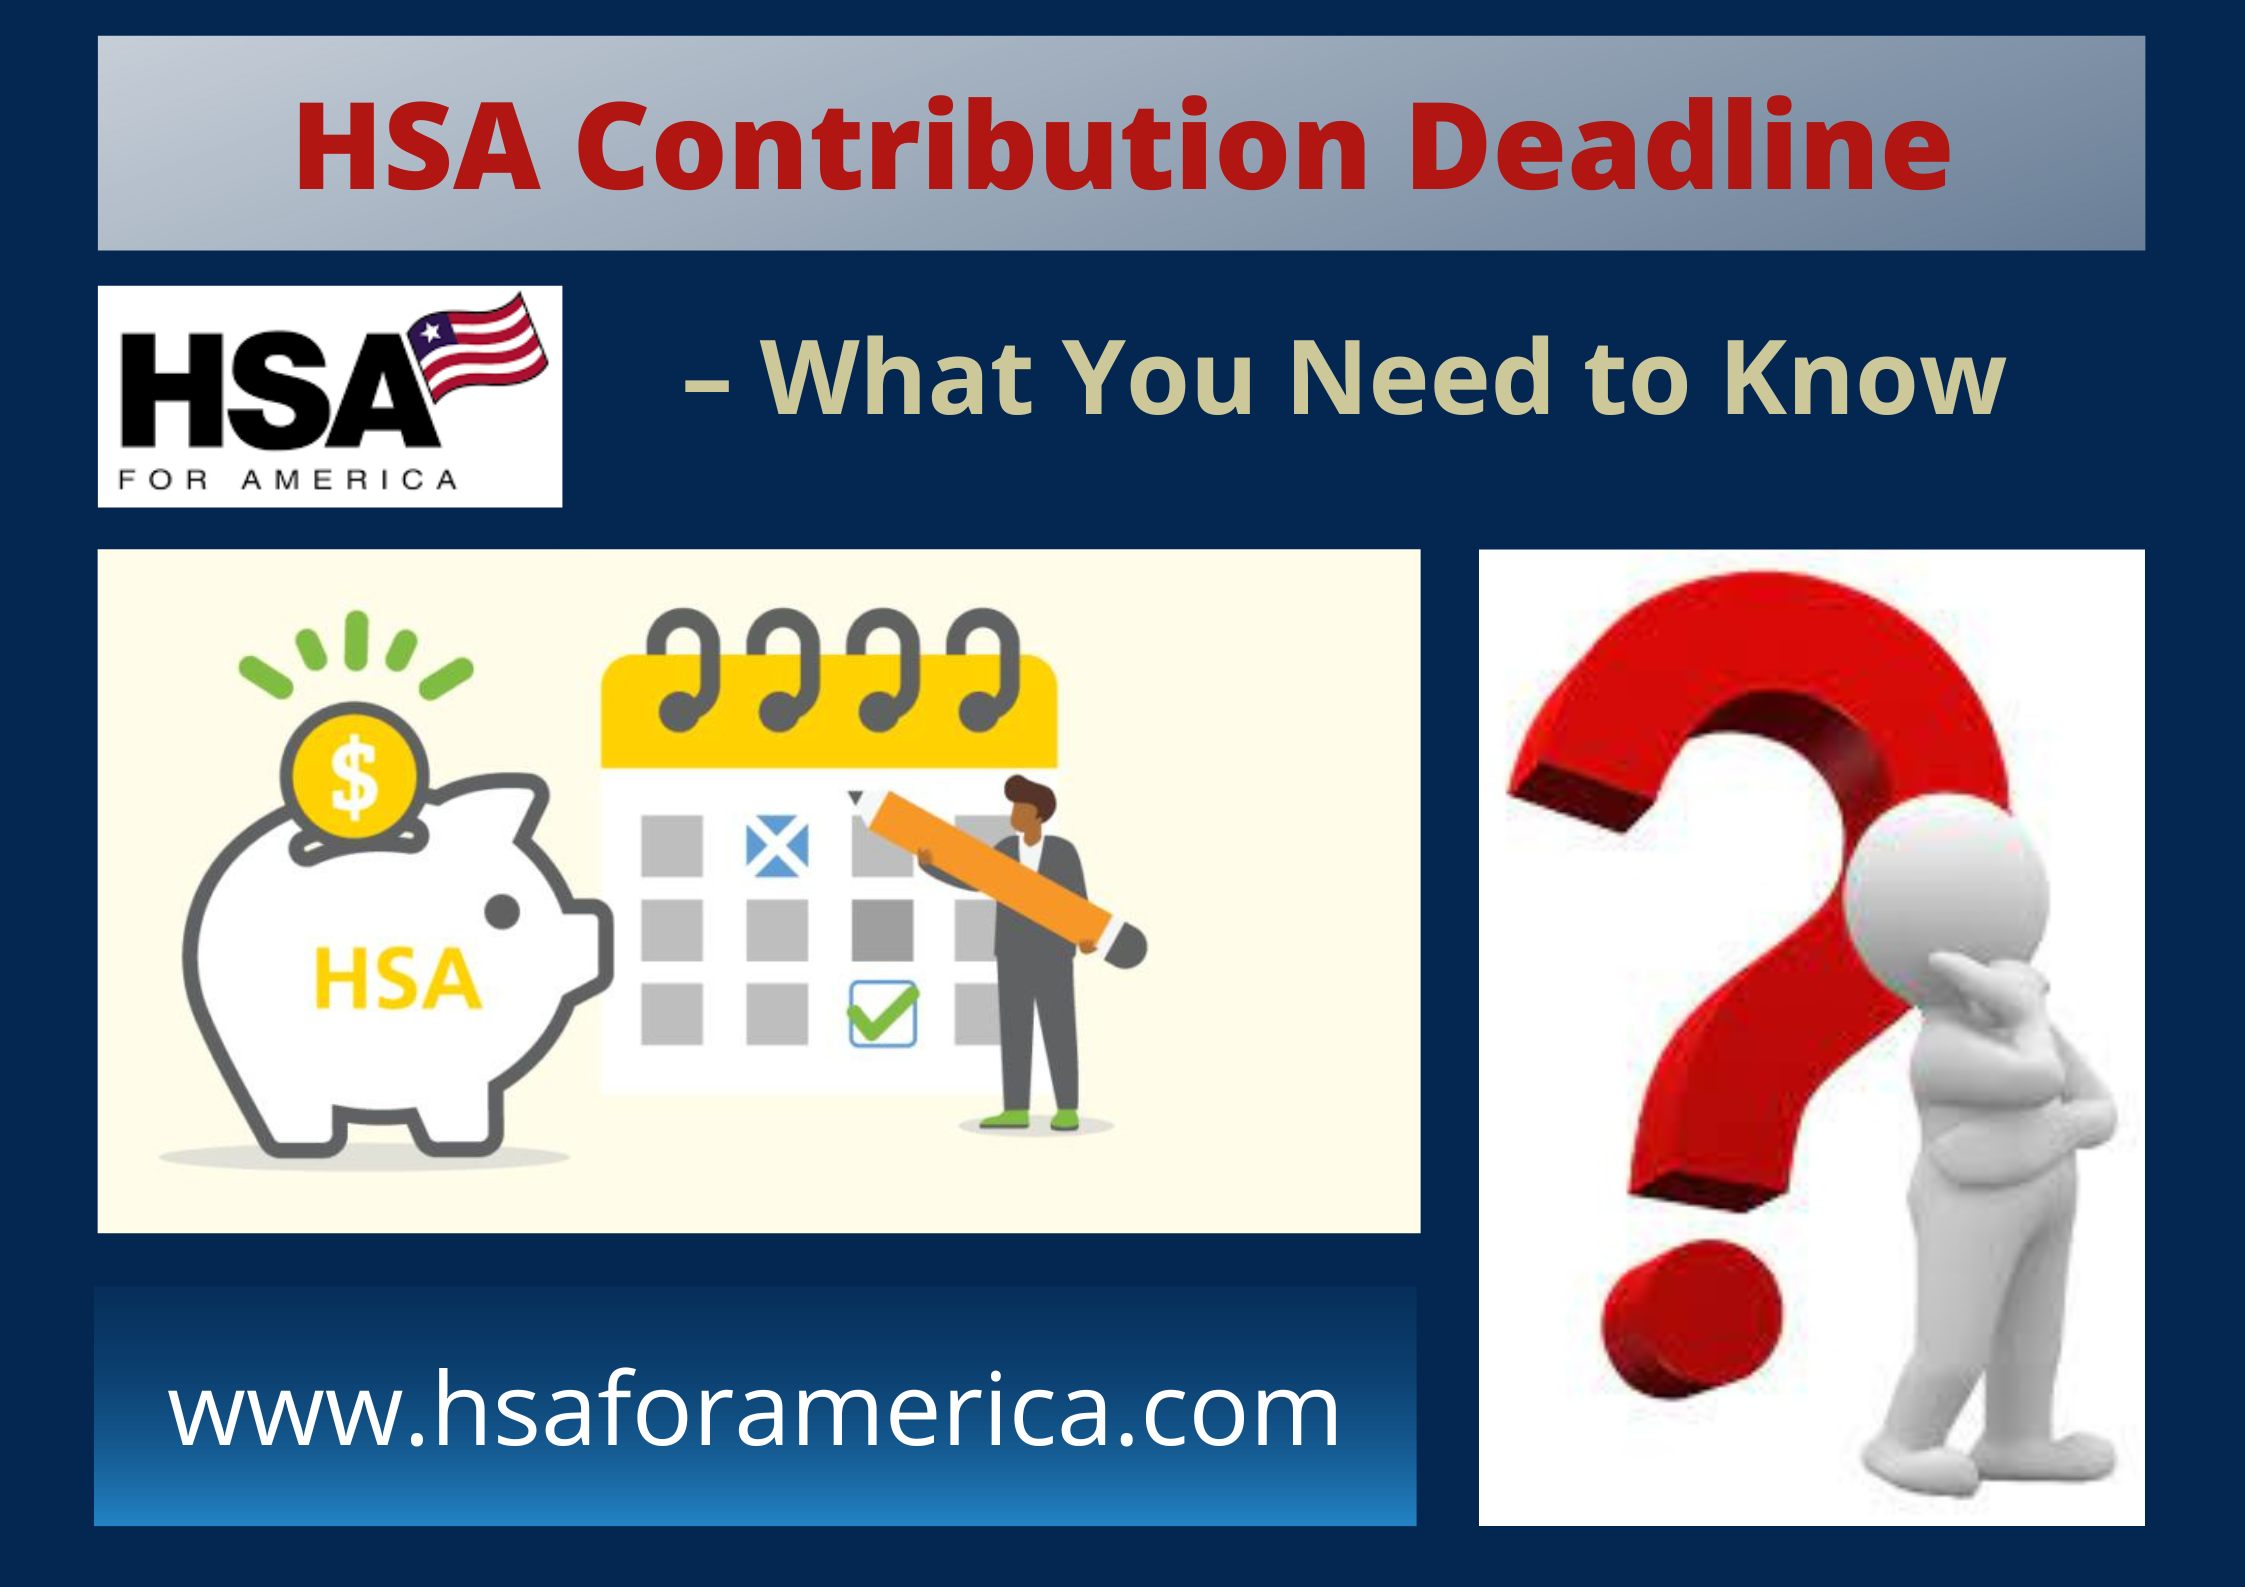 HSA and FSA Accounts: What You Need to Know